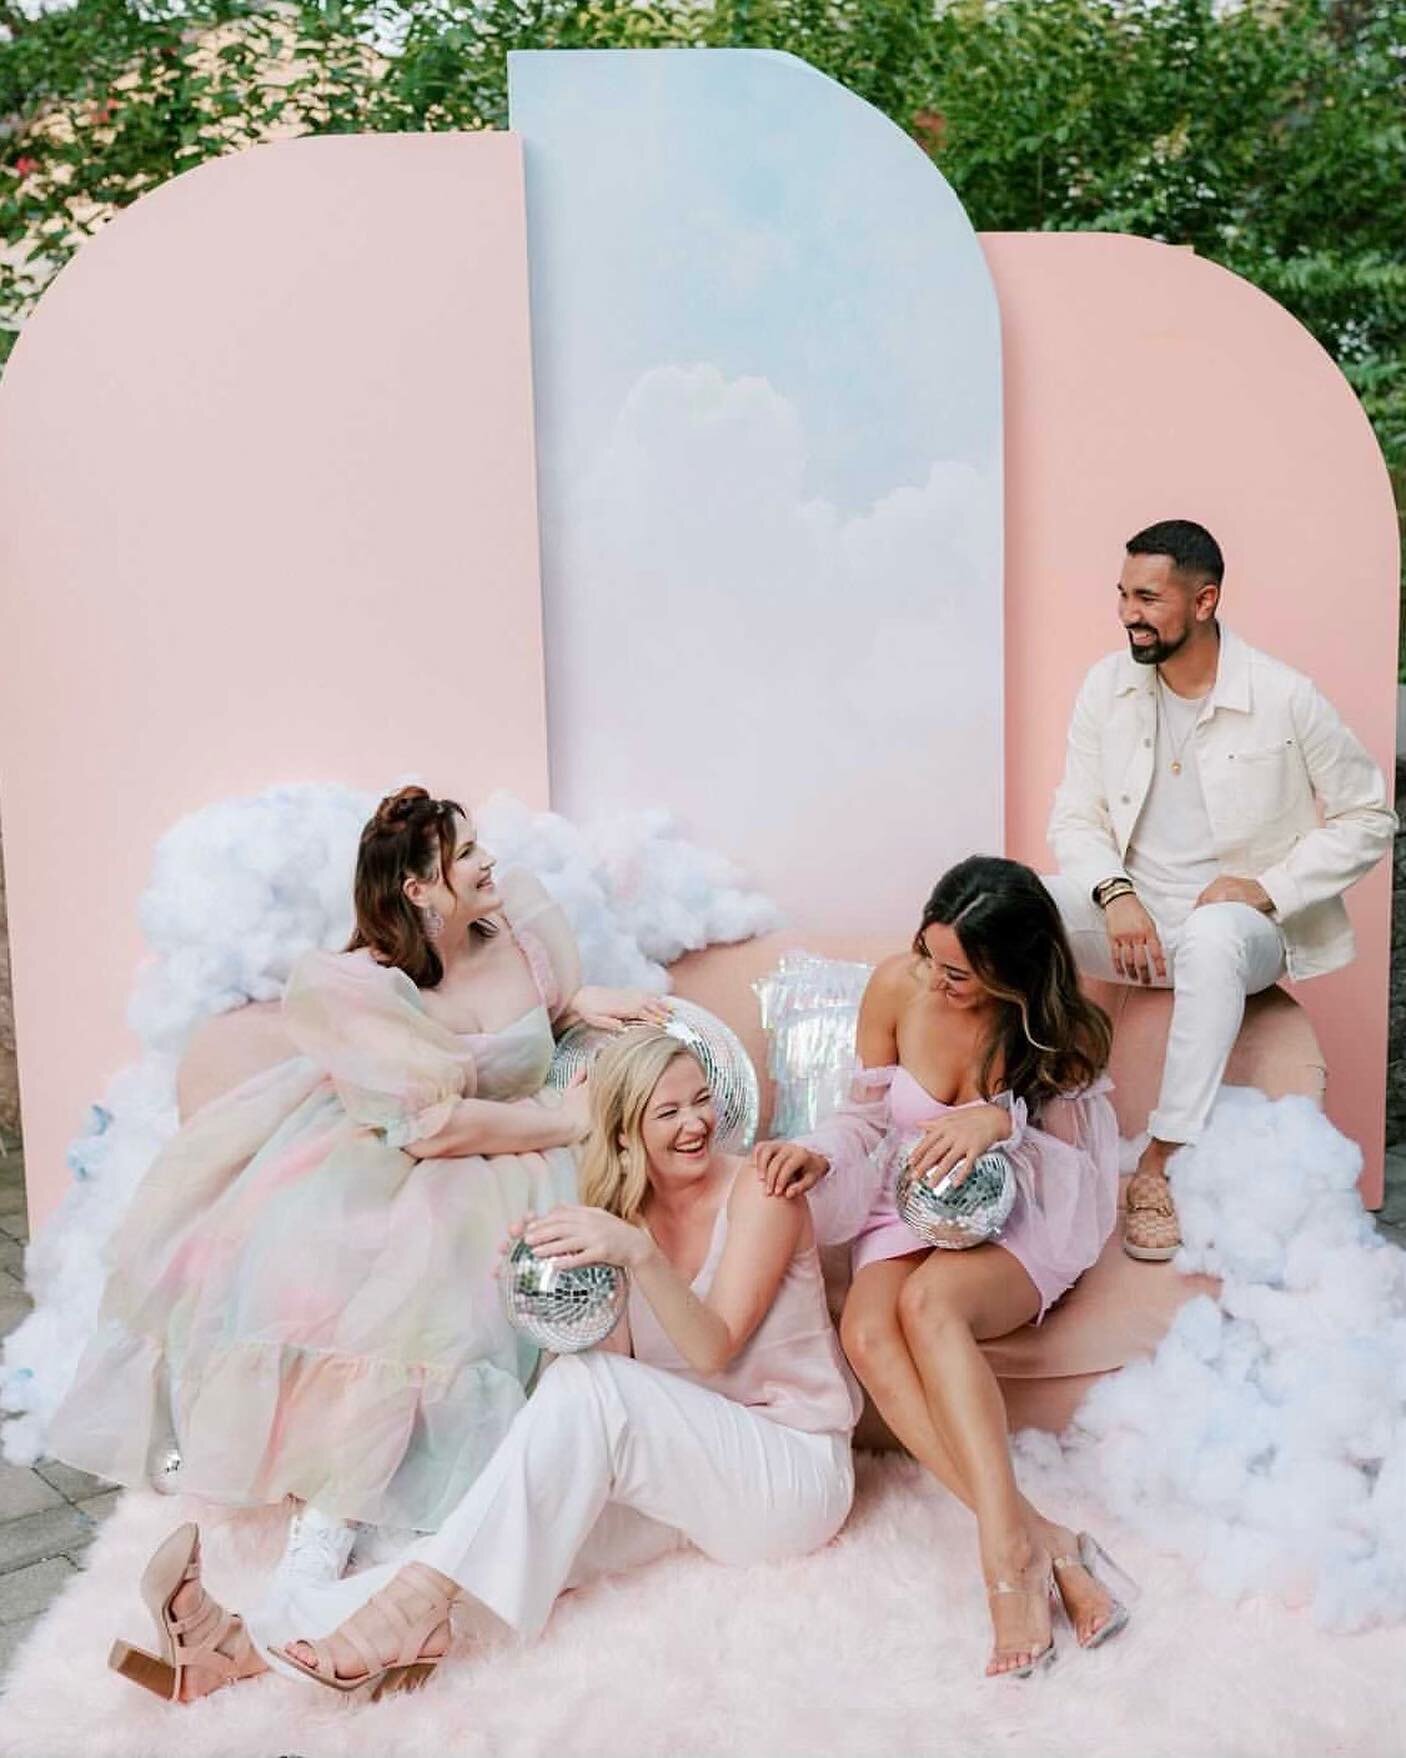 Love this team so much!!! Yesterday was just the best ☁️💛💿🌈.

Photography: @hanagonzalezphoto | Rentals: @smthingvintage | Clouds and signage: @brightlyeverafter | Makeup: @makeupbyshirin_ | Hair @mab.artistry Lexi | IRE team: @idarose_alex @idaro